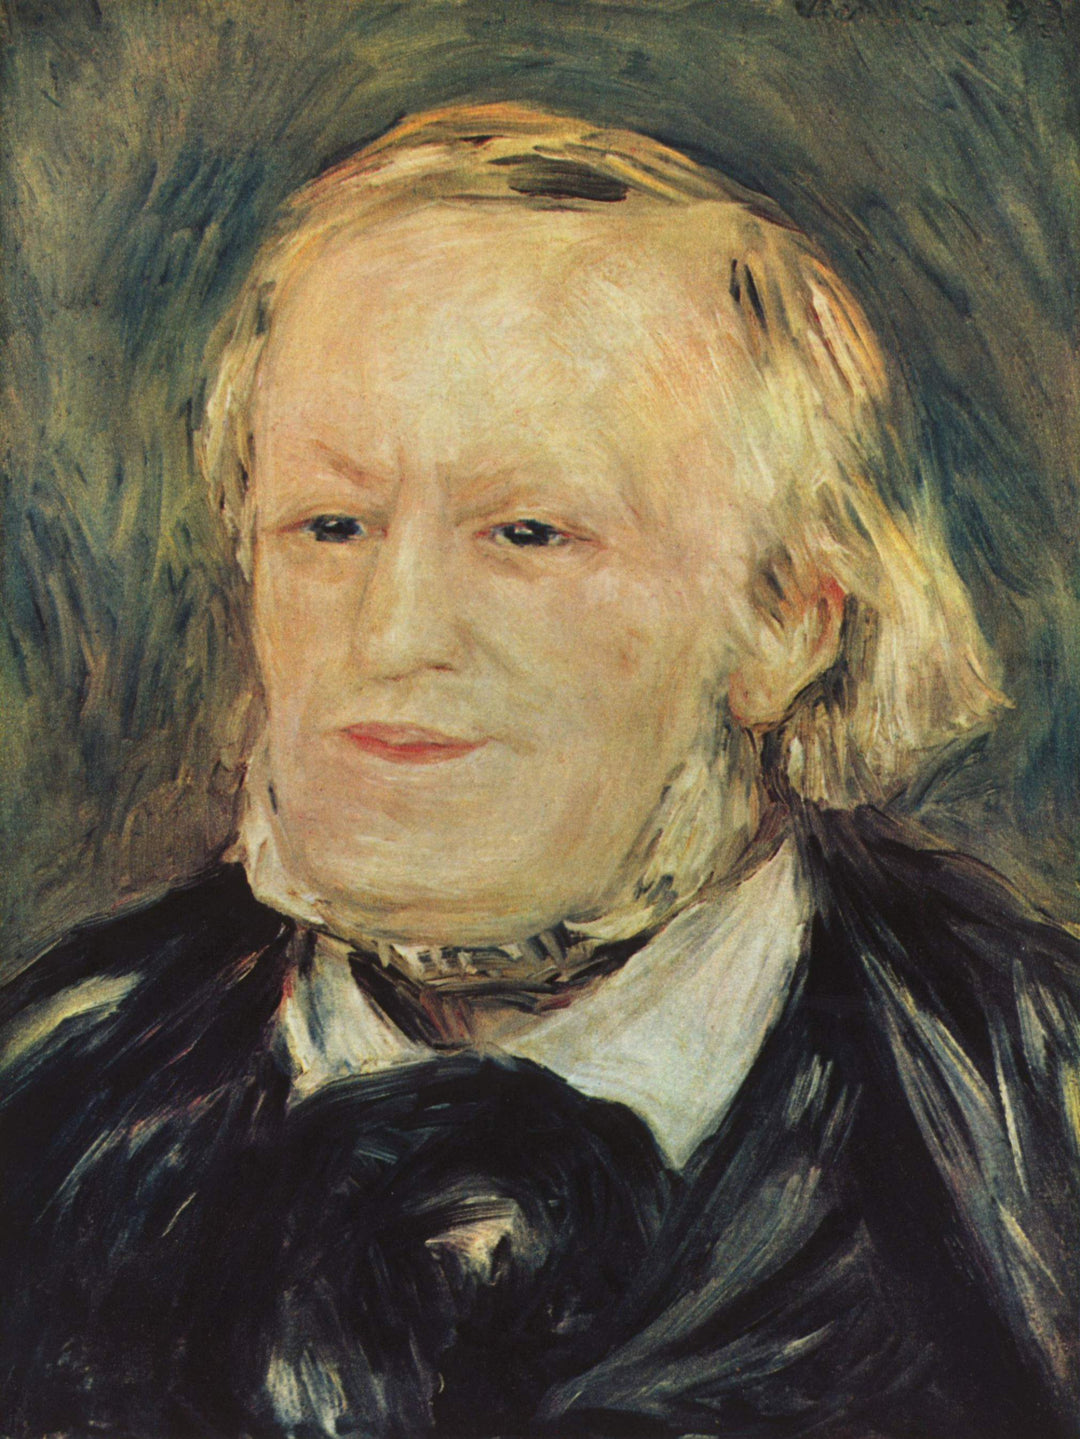 Portrait of Richard Wagner by Pierre-Auguste Renoir Reproduction for Sale by Blue Surf Art